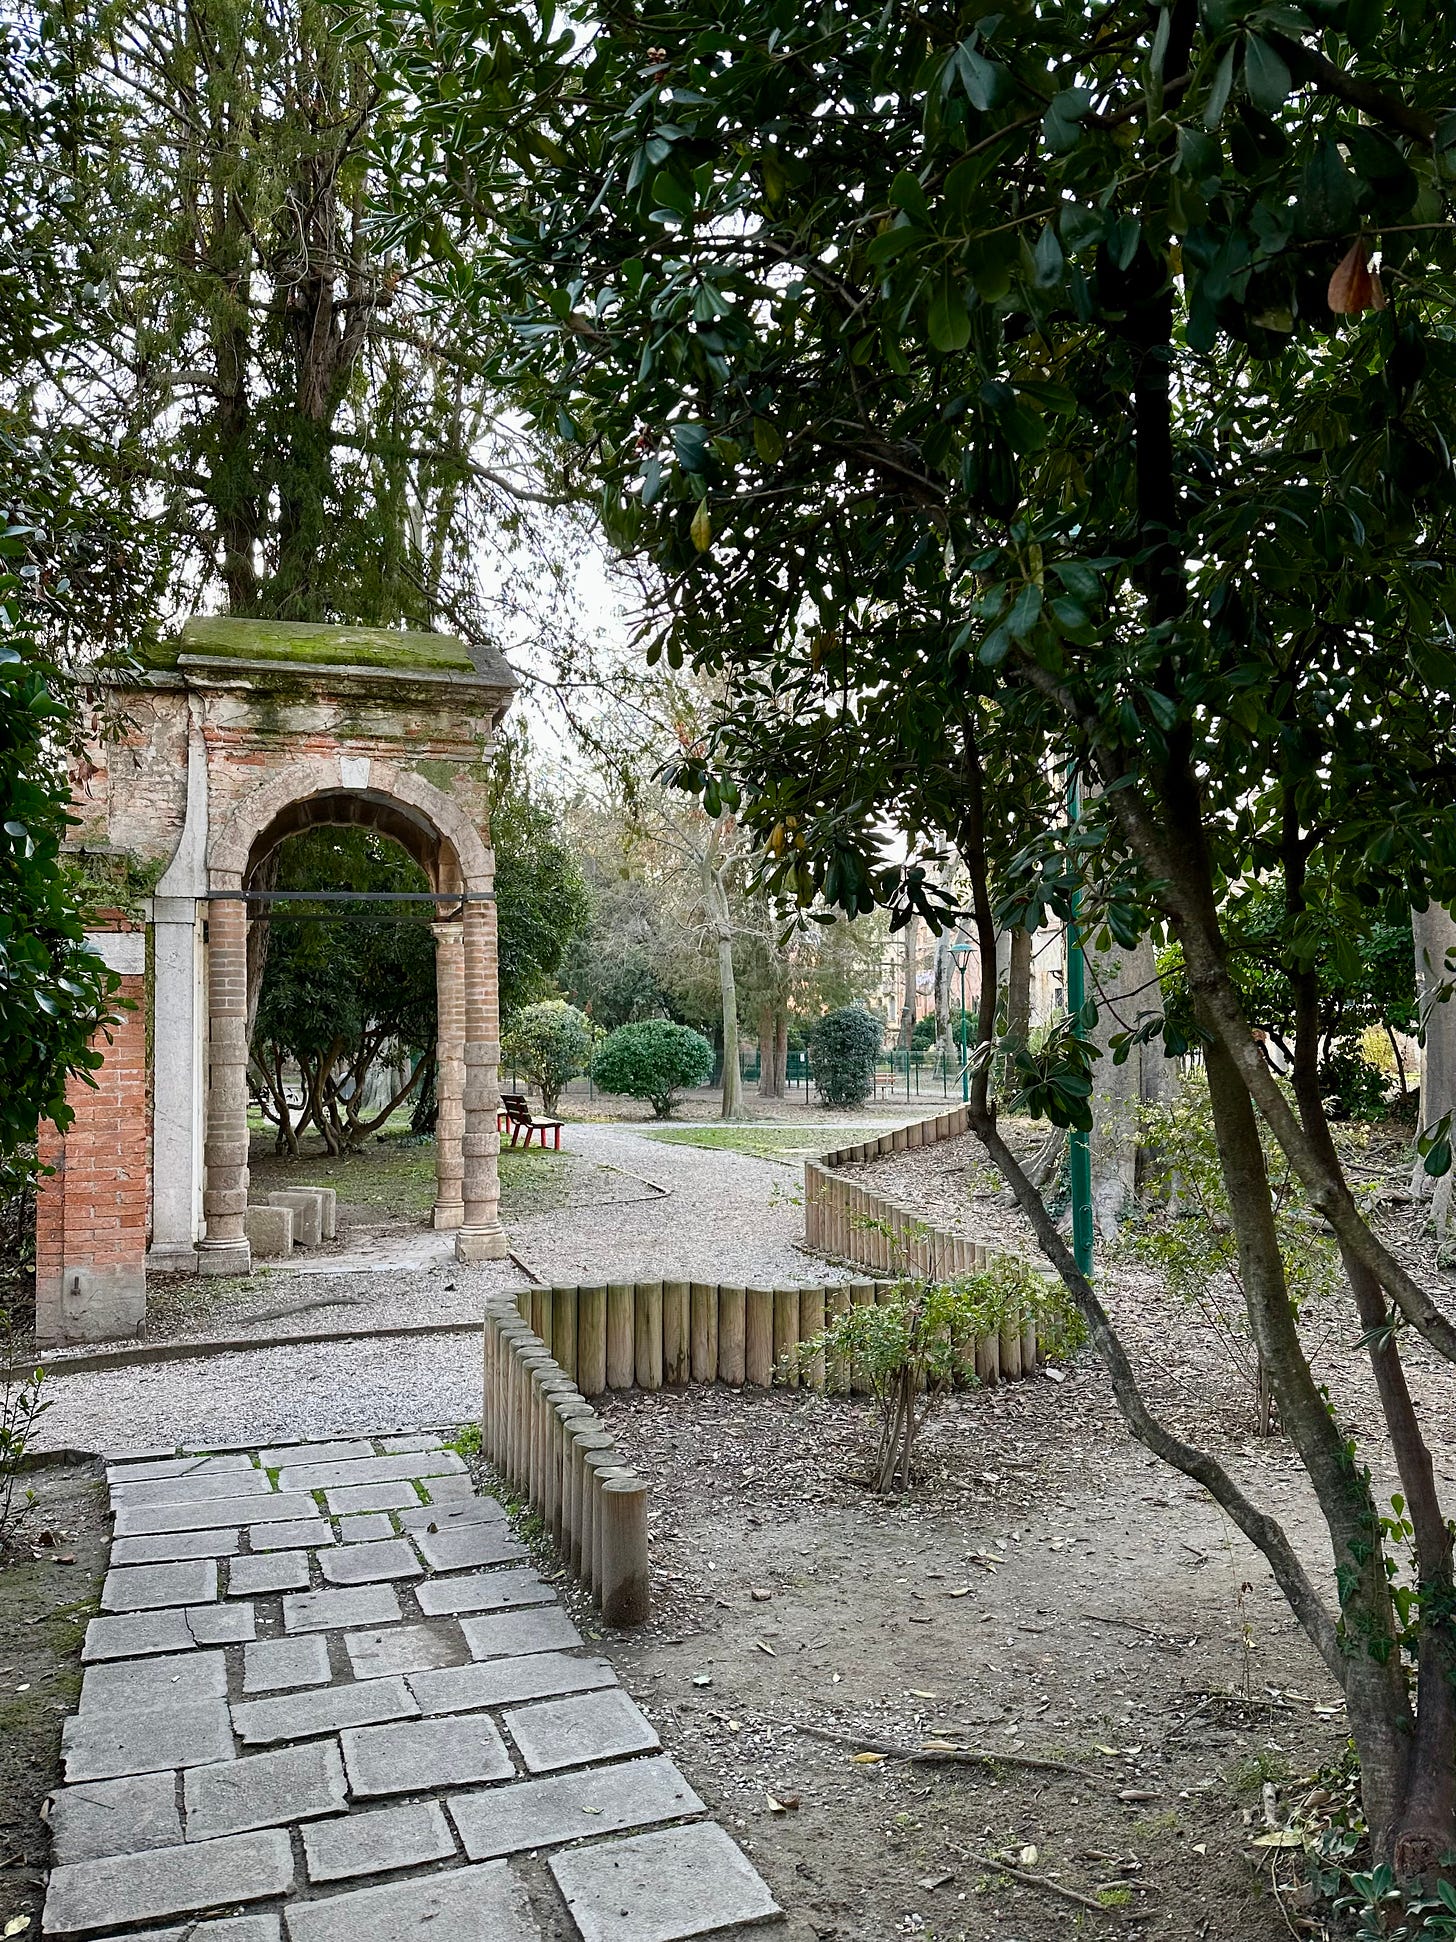 Garden path and stone doorway fragment in the Parco Savorgnan, Venice